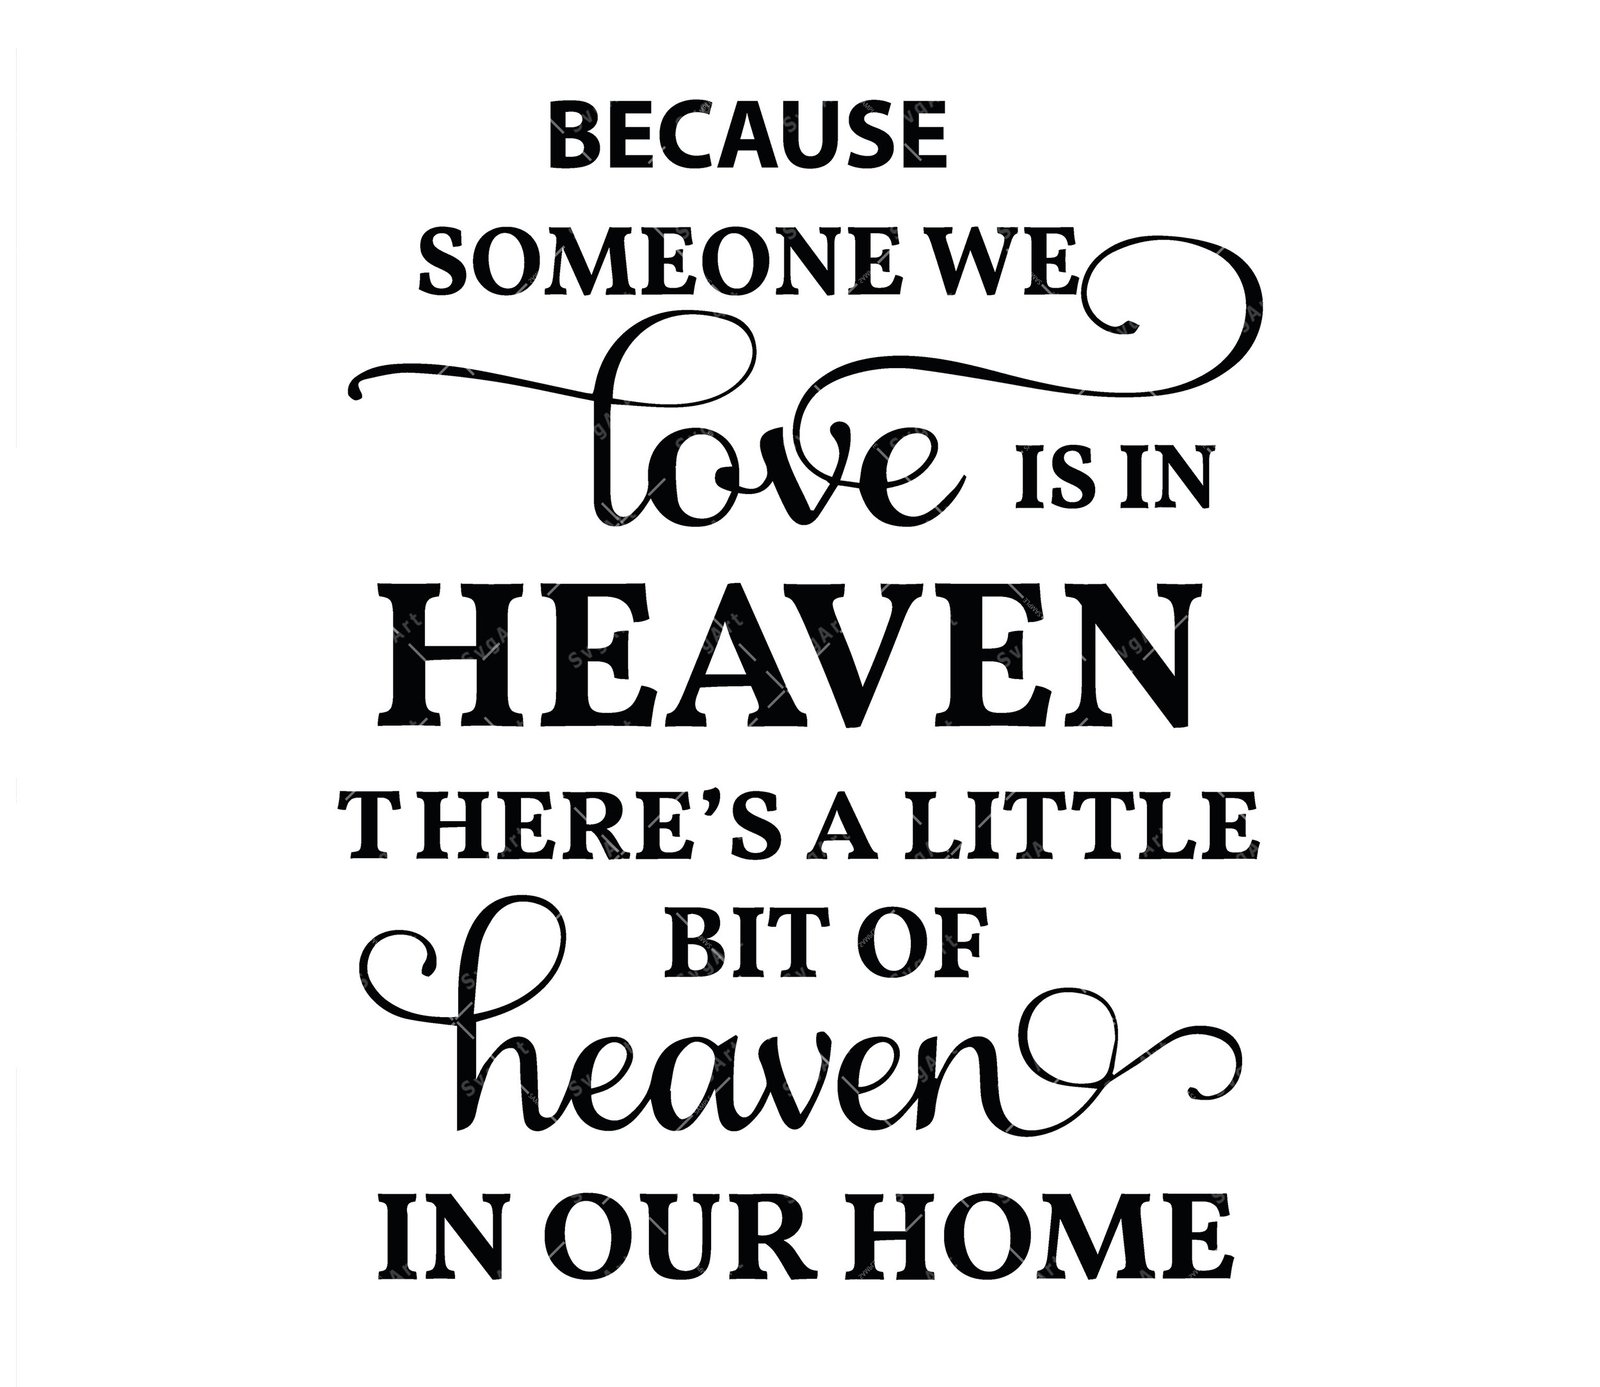 Because Someone We Love is in Heaven, There is a Little Bit of Heaven ...